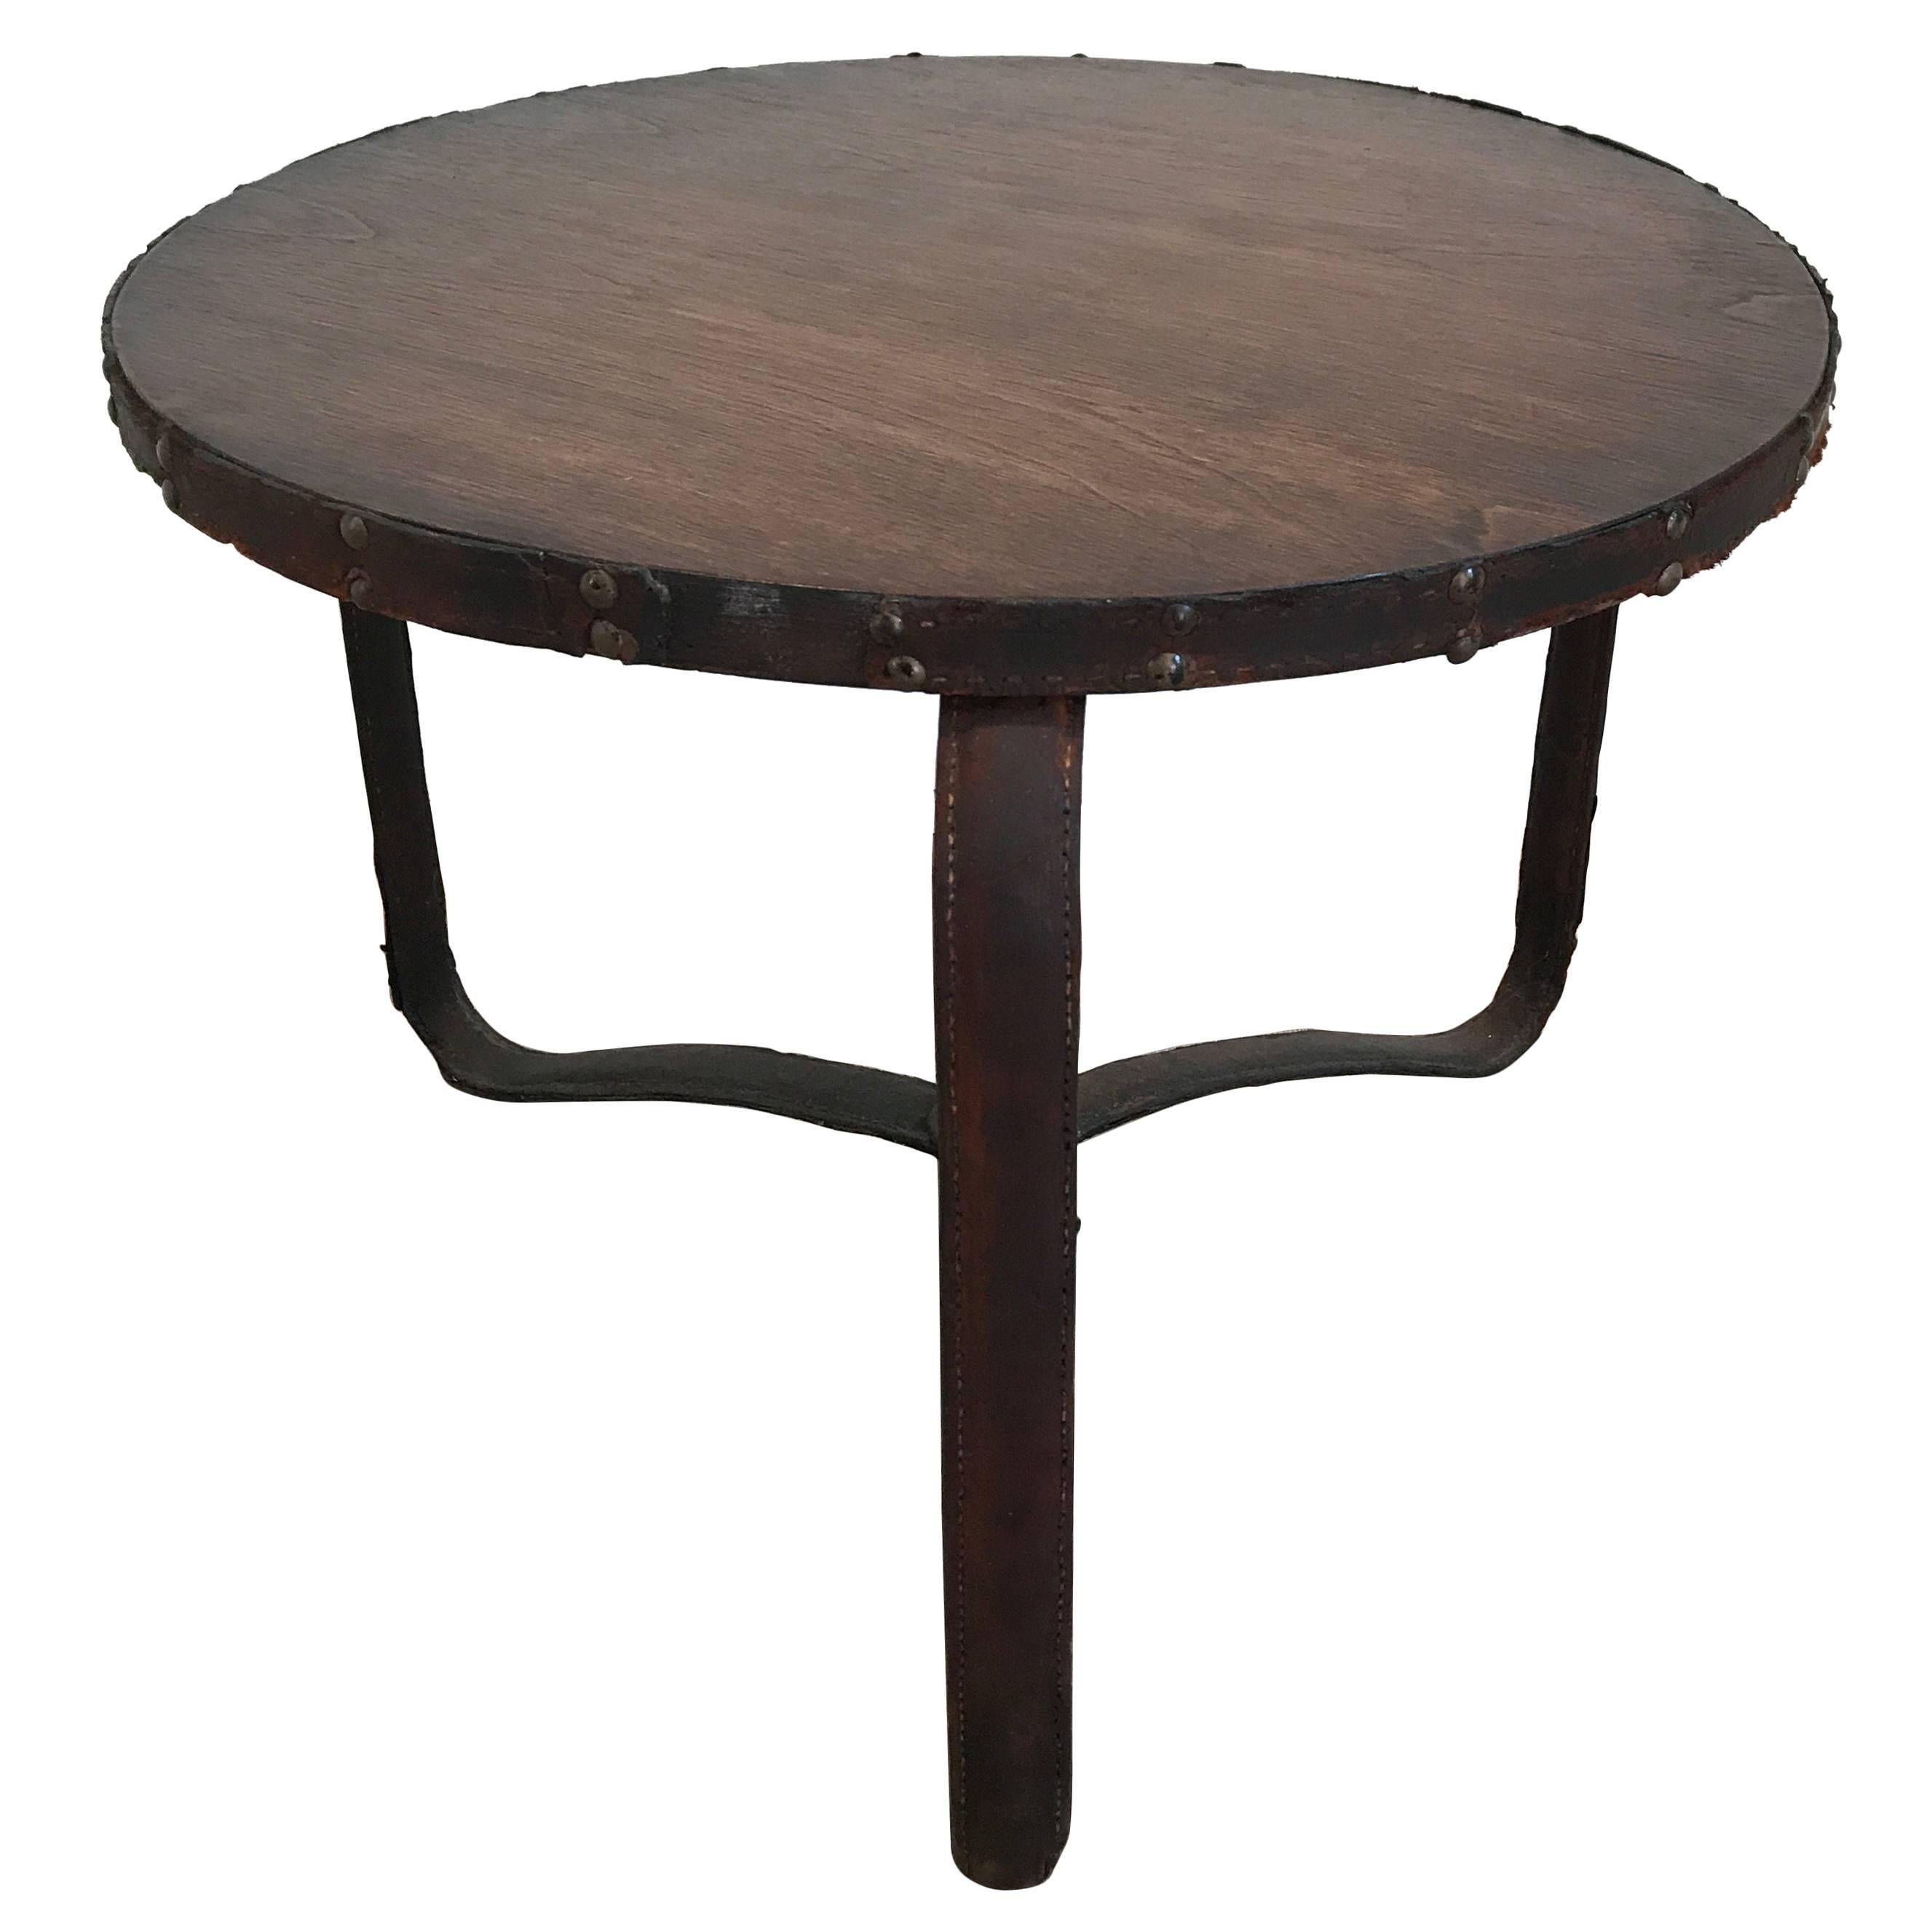 An early Jacques Adnet stitched leather table with oak top. Wonderful vintage example with distressed leather and few losses. The top has been lightly restored as well as reinforcing the leather.